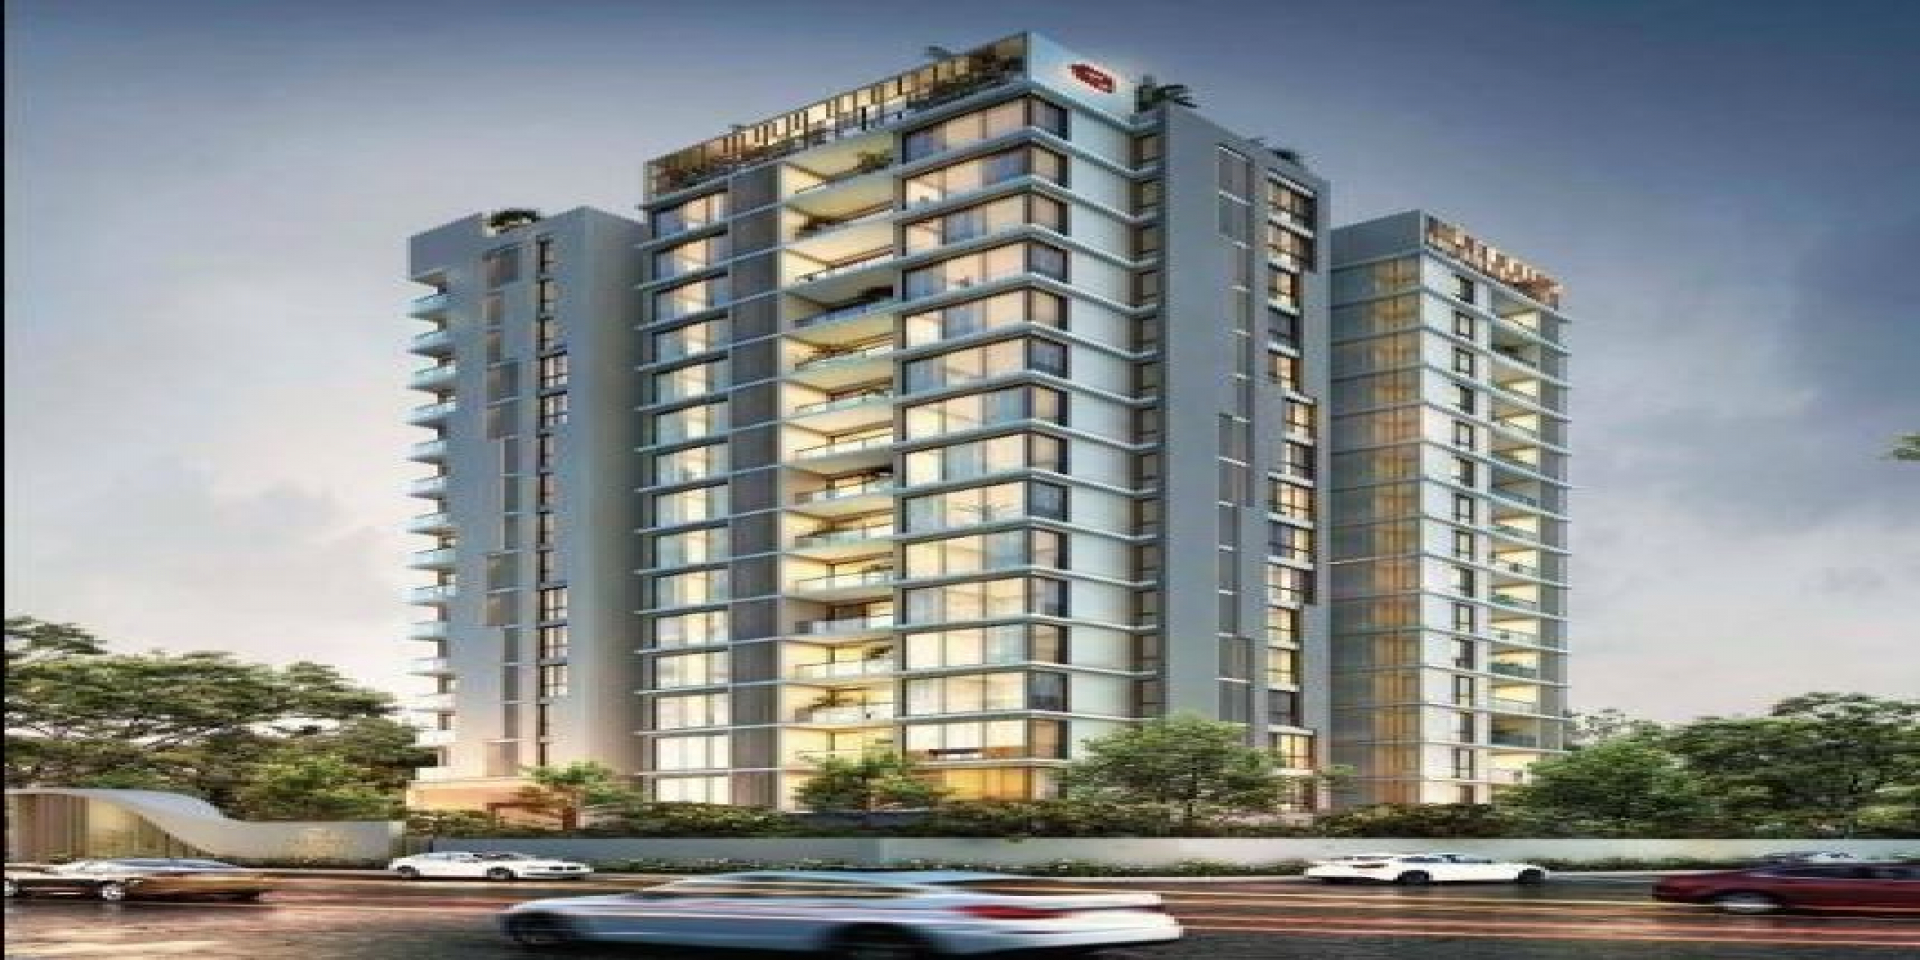 3, 4 BHK Apartment for sale in R A Puram